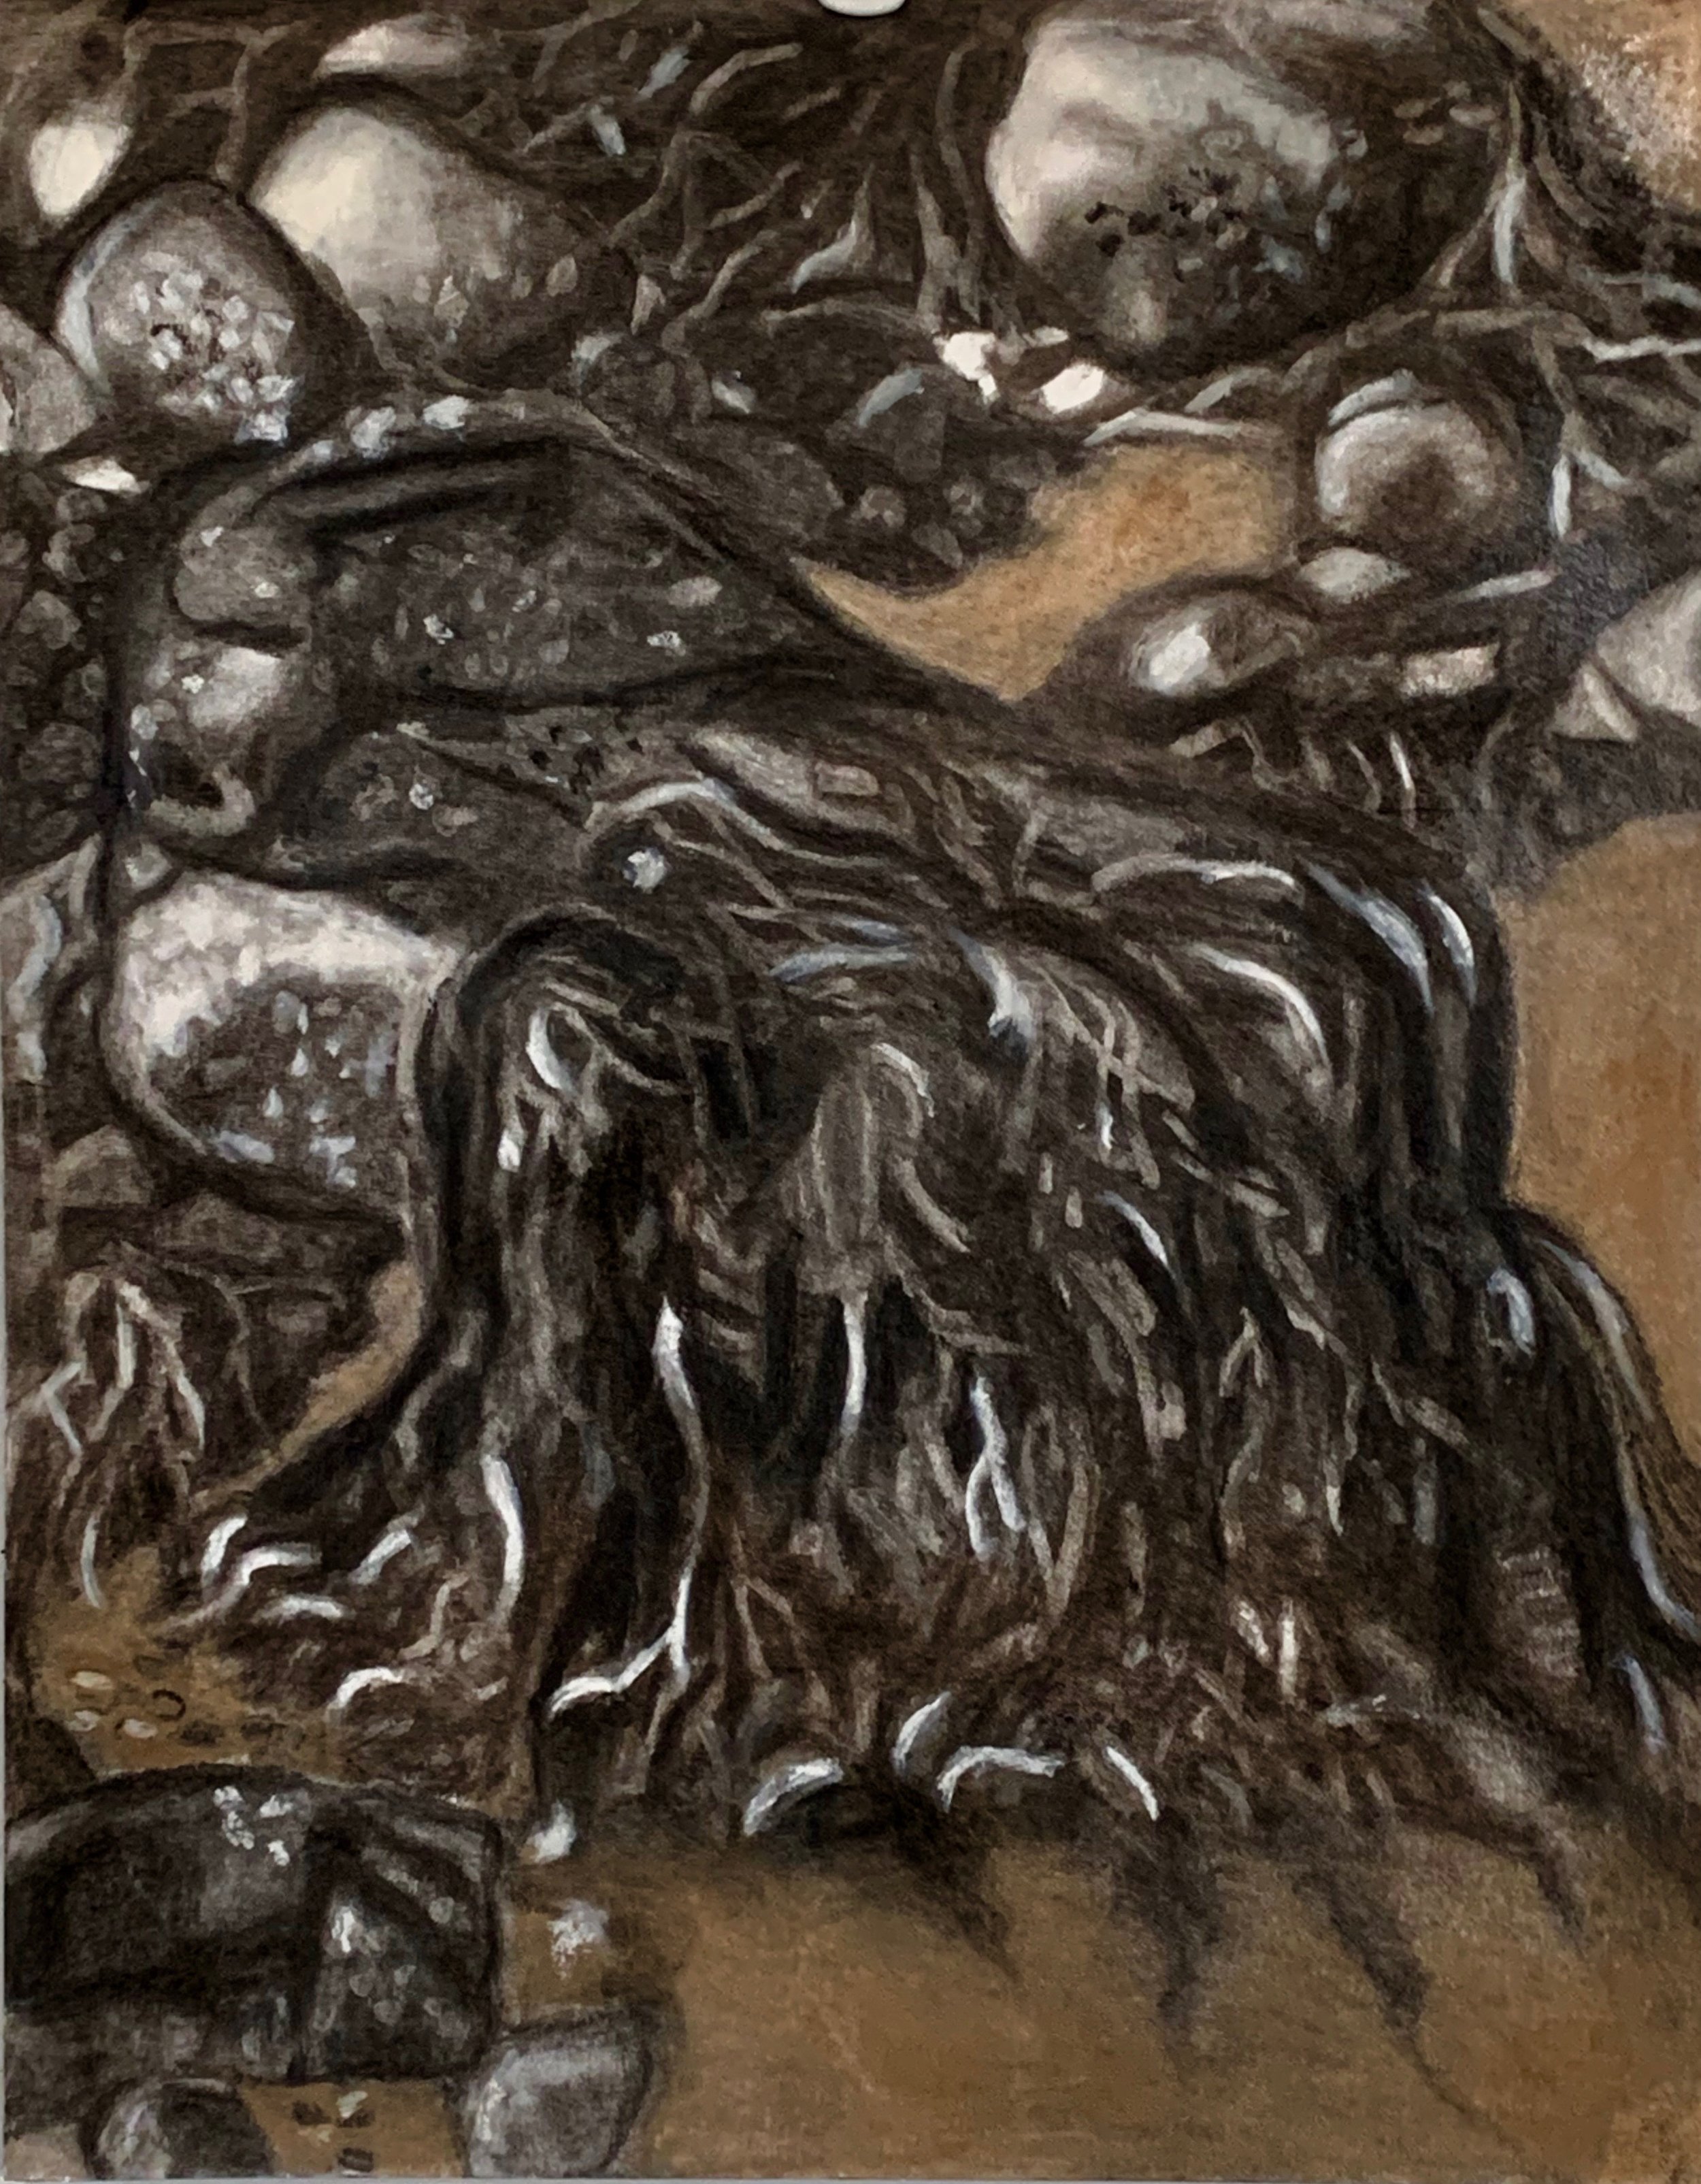   Sea Monster  Charcoal with pastel on vellum mounted on aluminum.  23 x 18 in./ 58.4 x 45.7 cm. 2019 